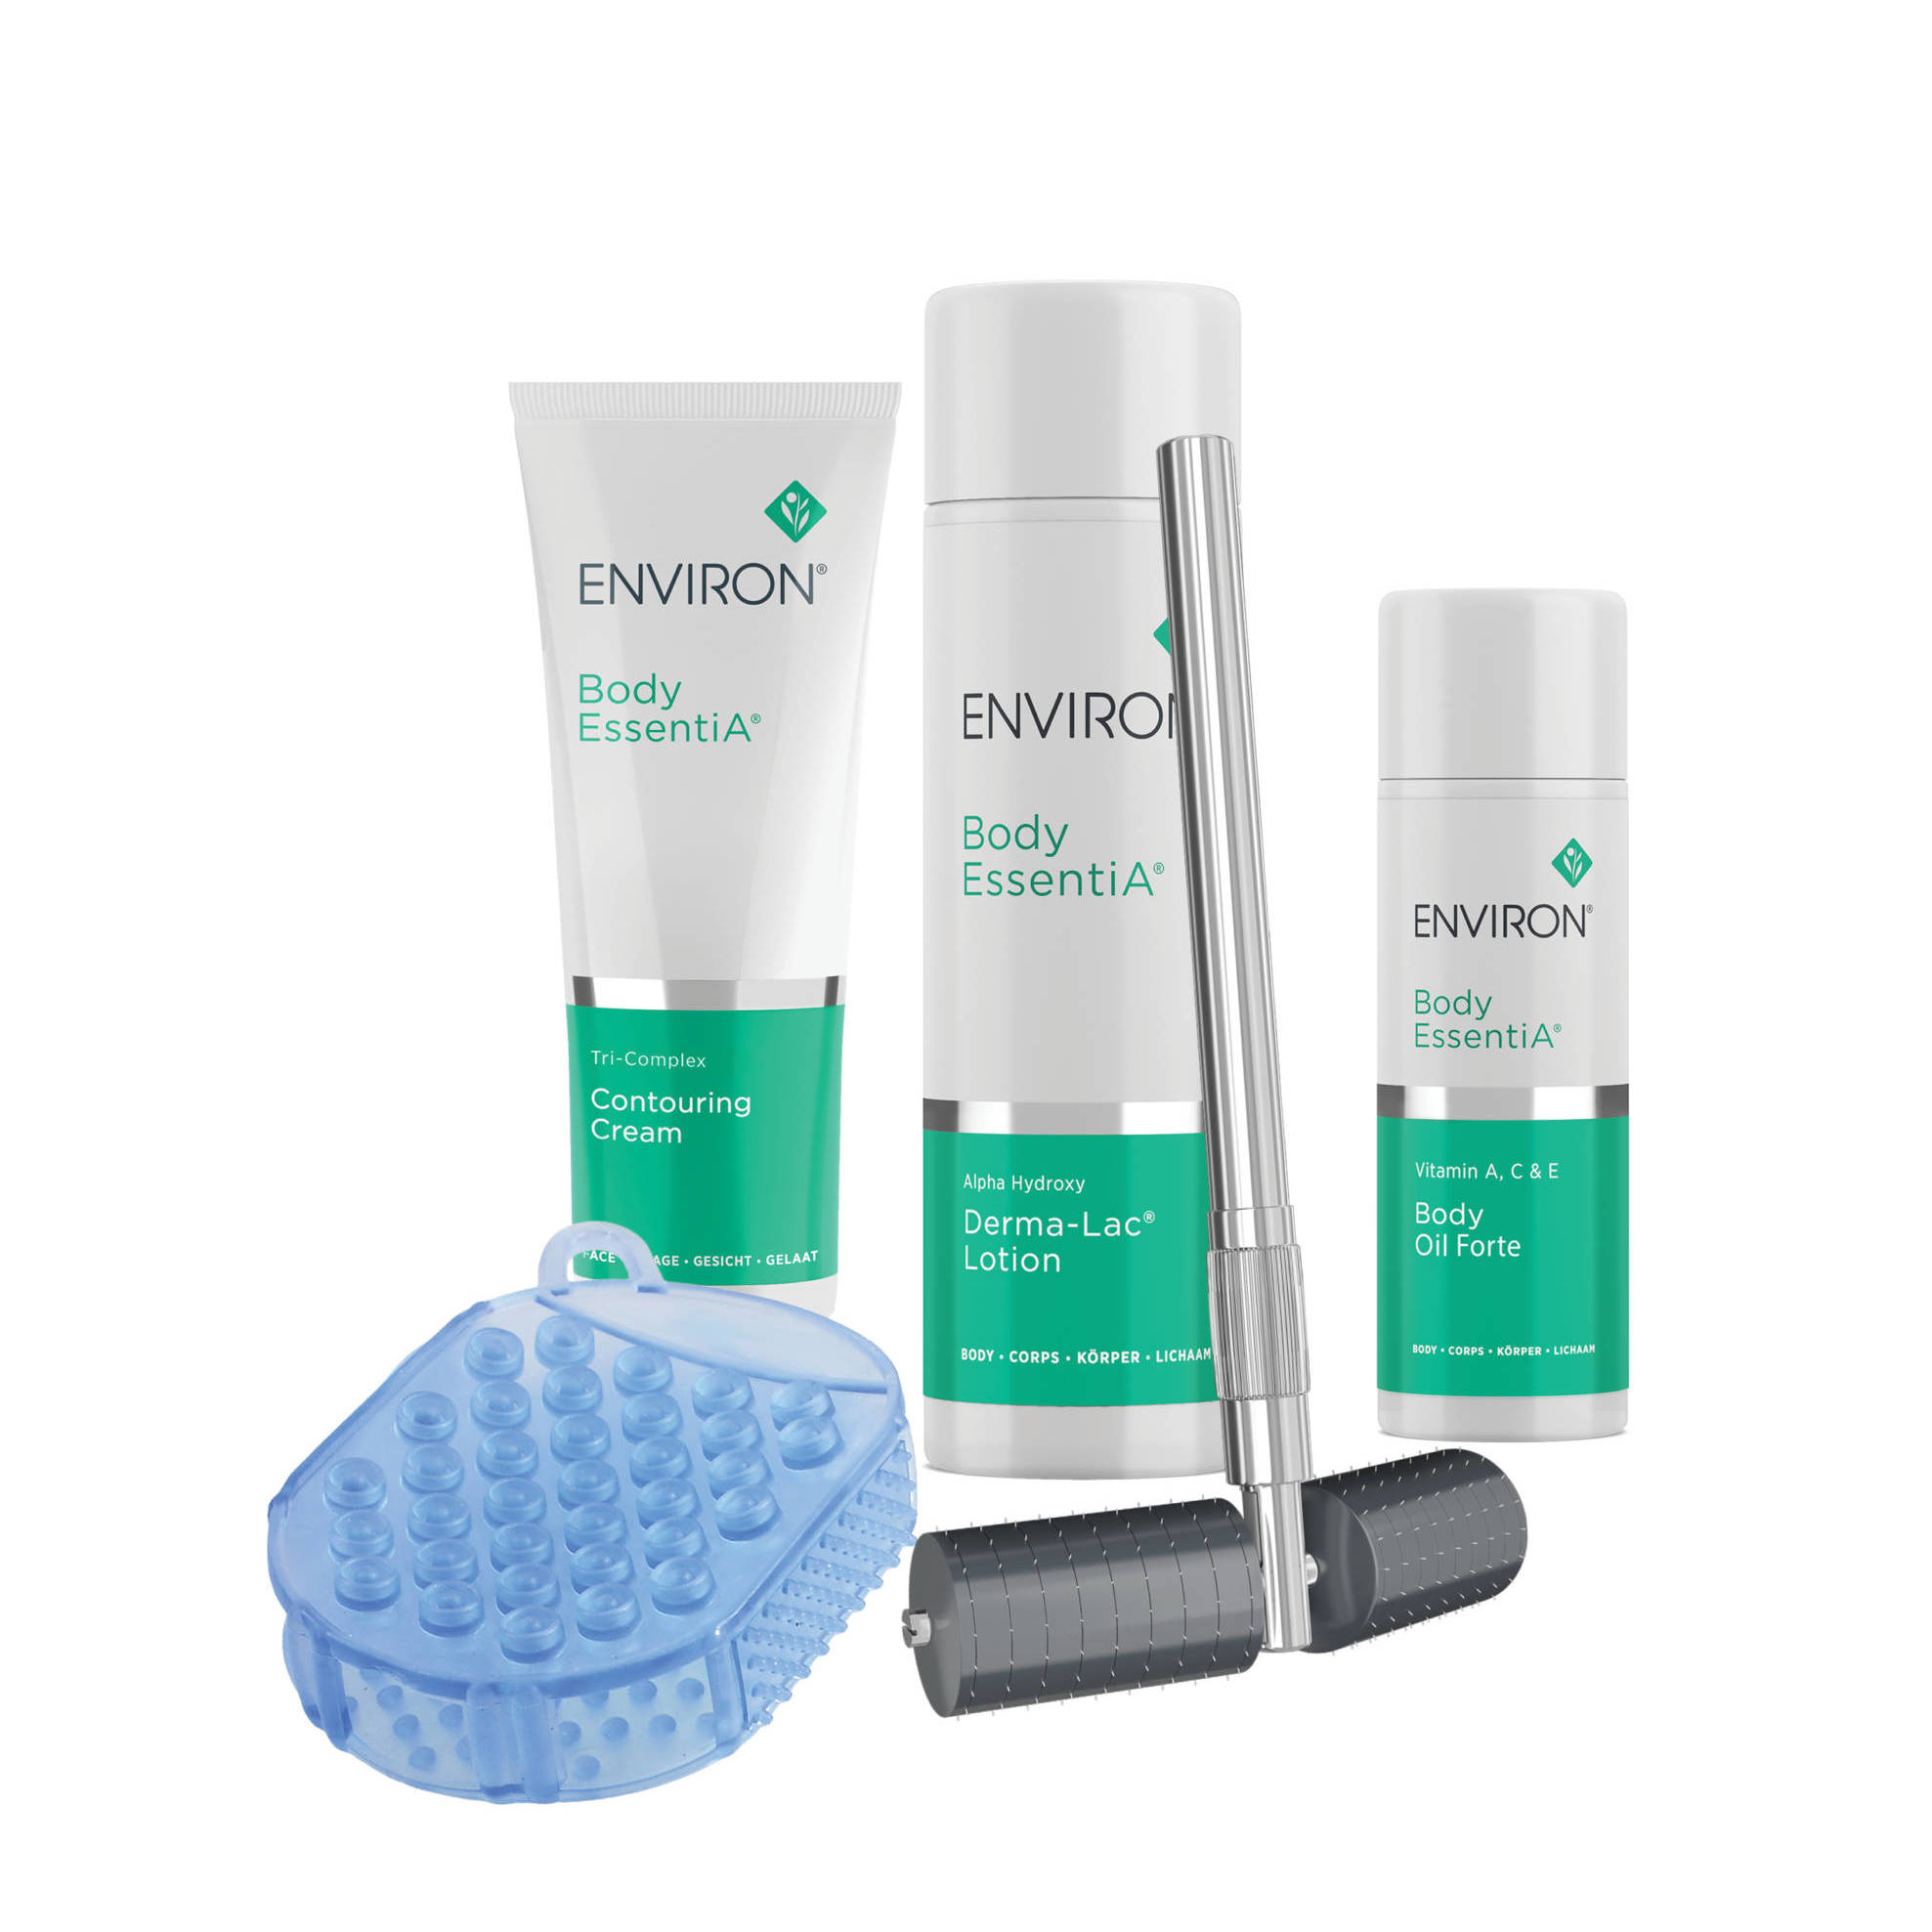 ultimate body skincare kit by Environ